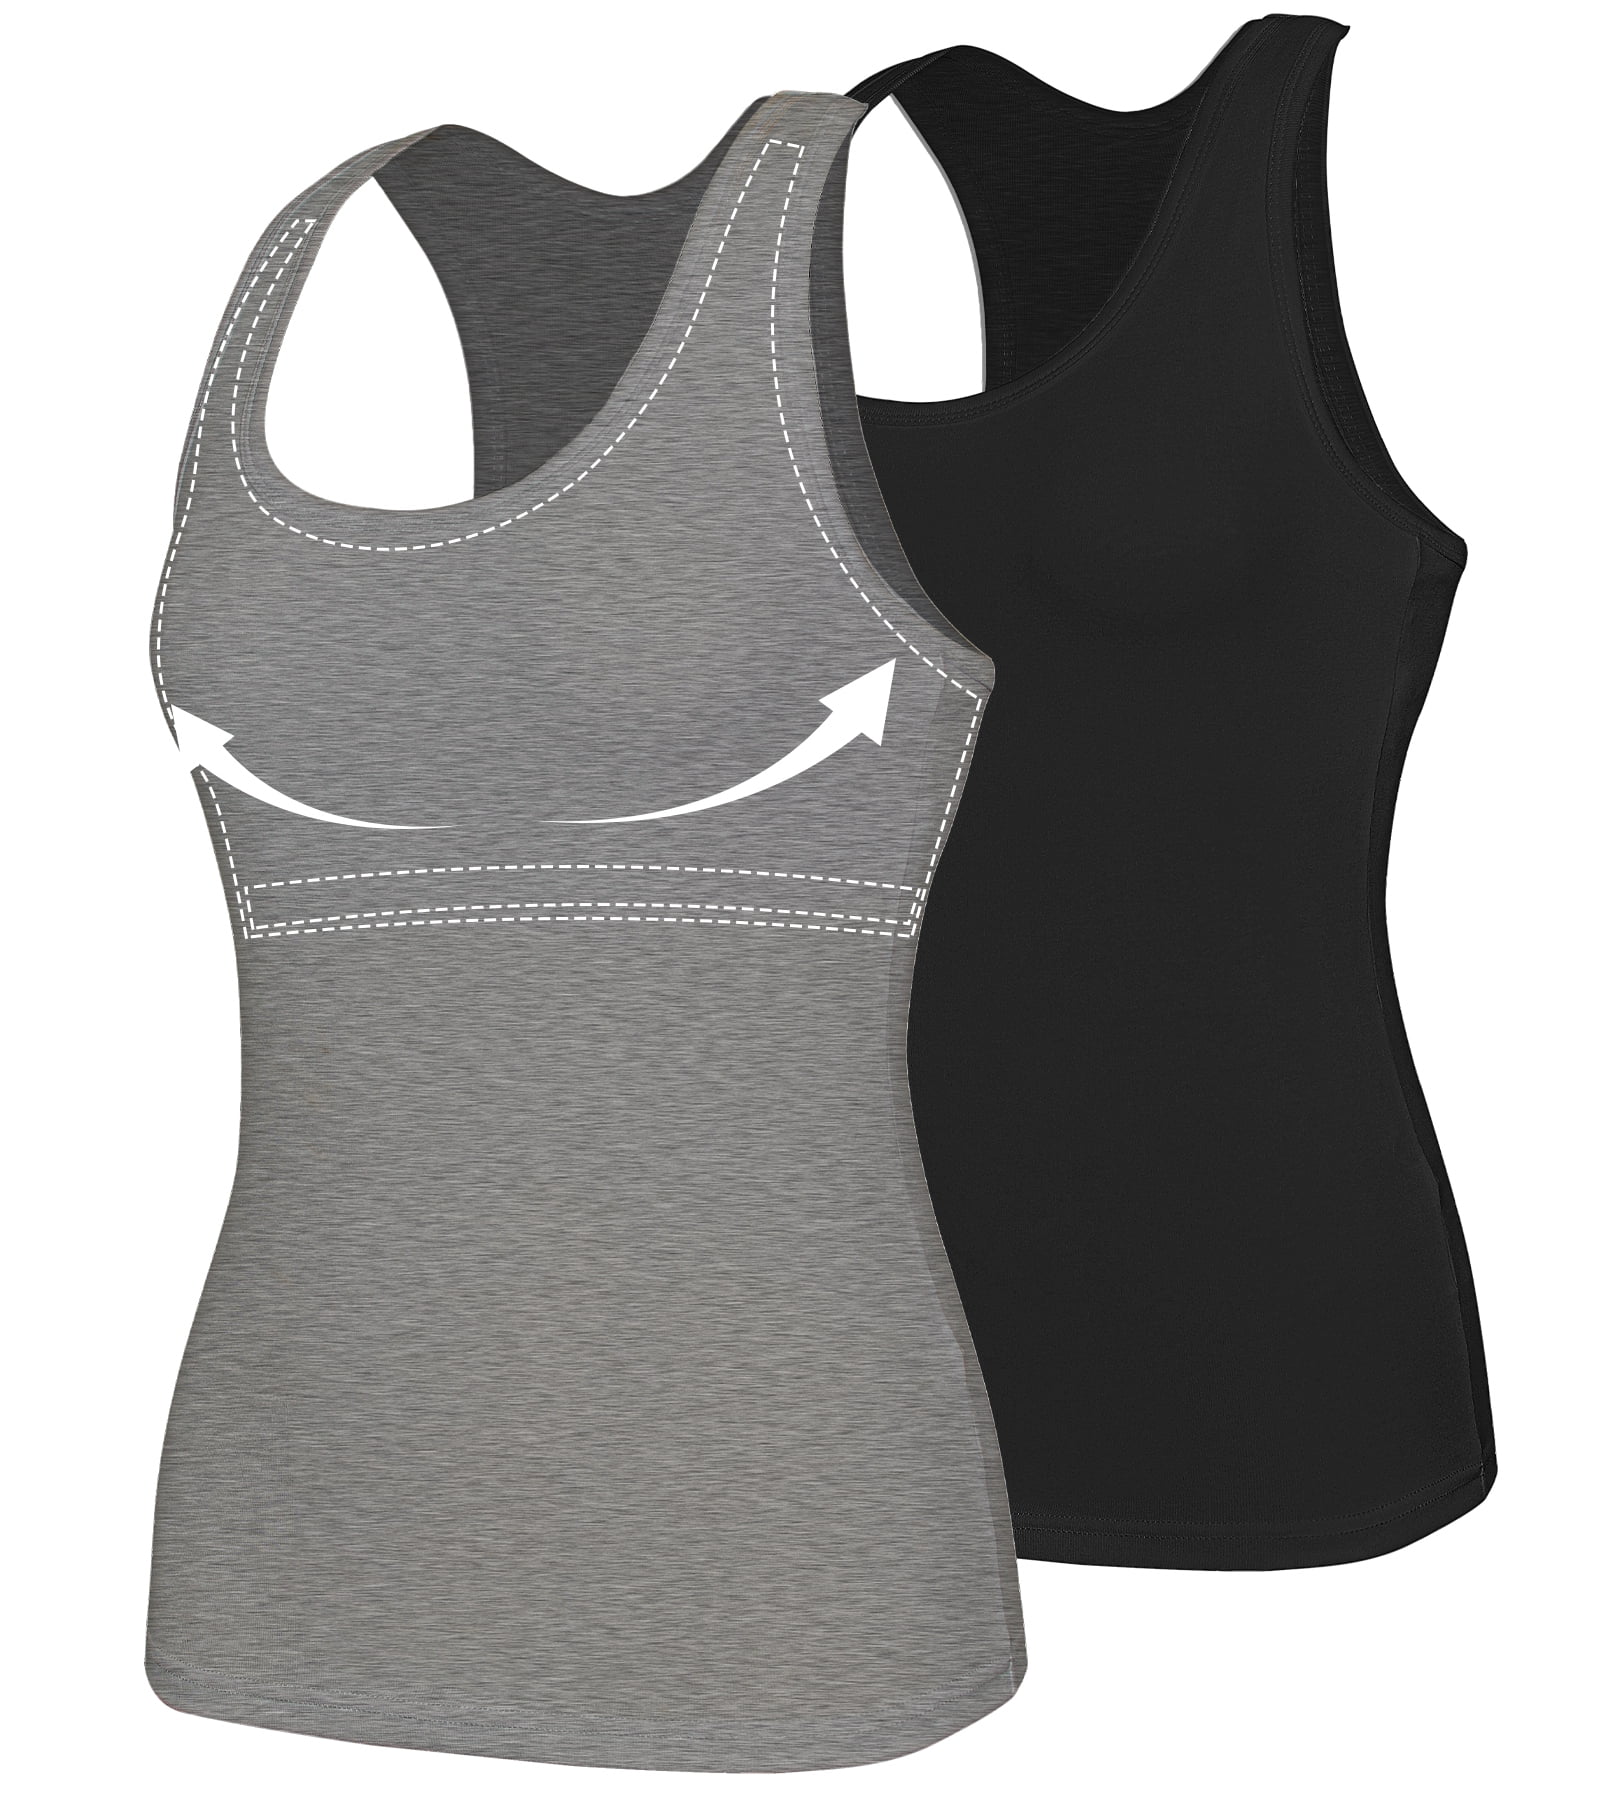 Anyfit Wear 2 Pack Racerback Workout Tank Tops With Shelf Bra for